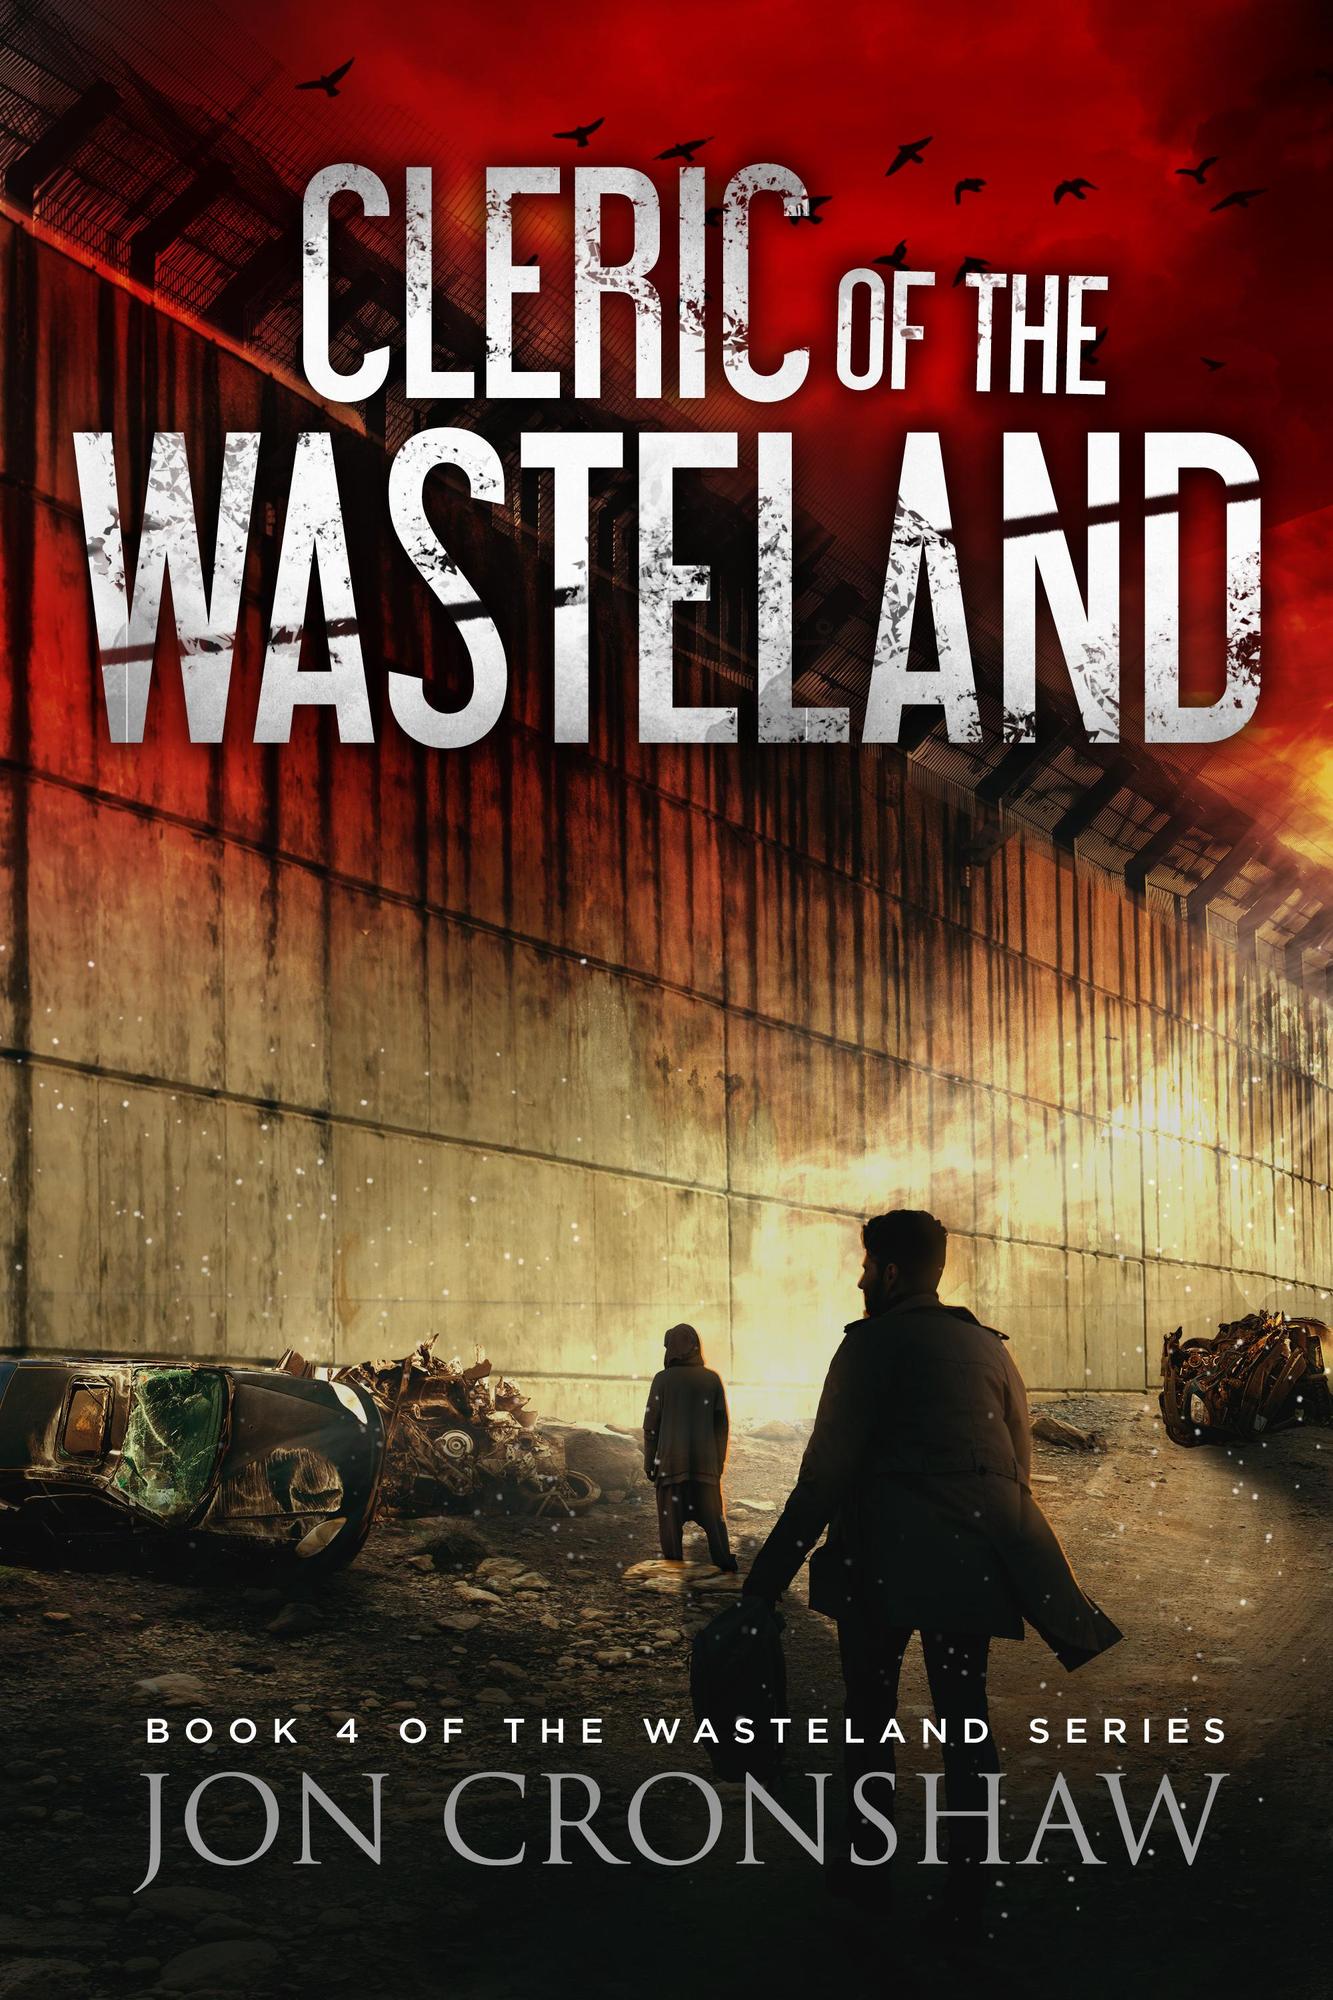 Smashwords – Cleric of the Wasteland – a book by Jon Cronshaw